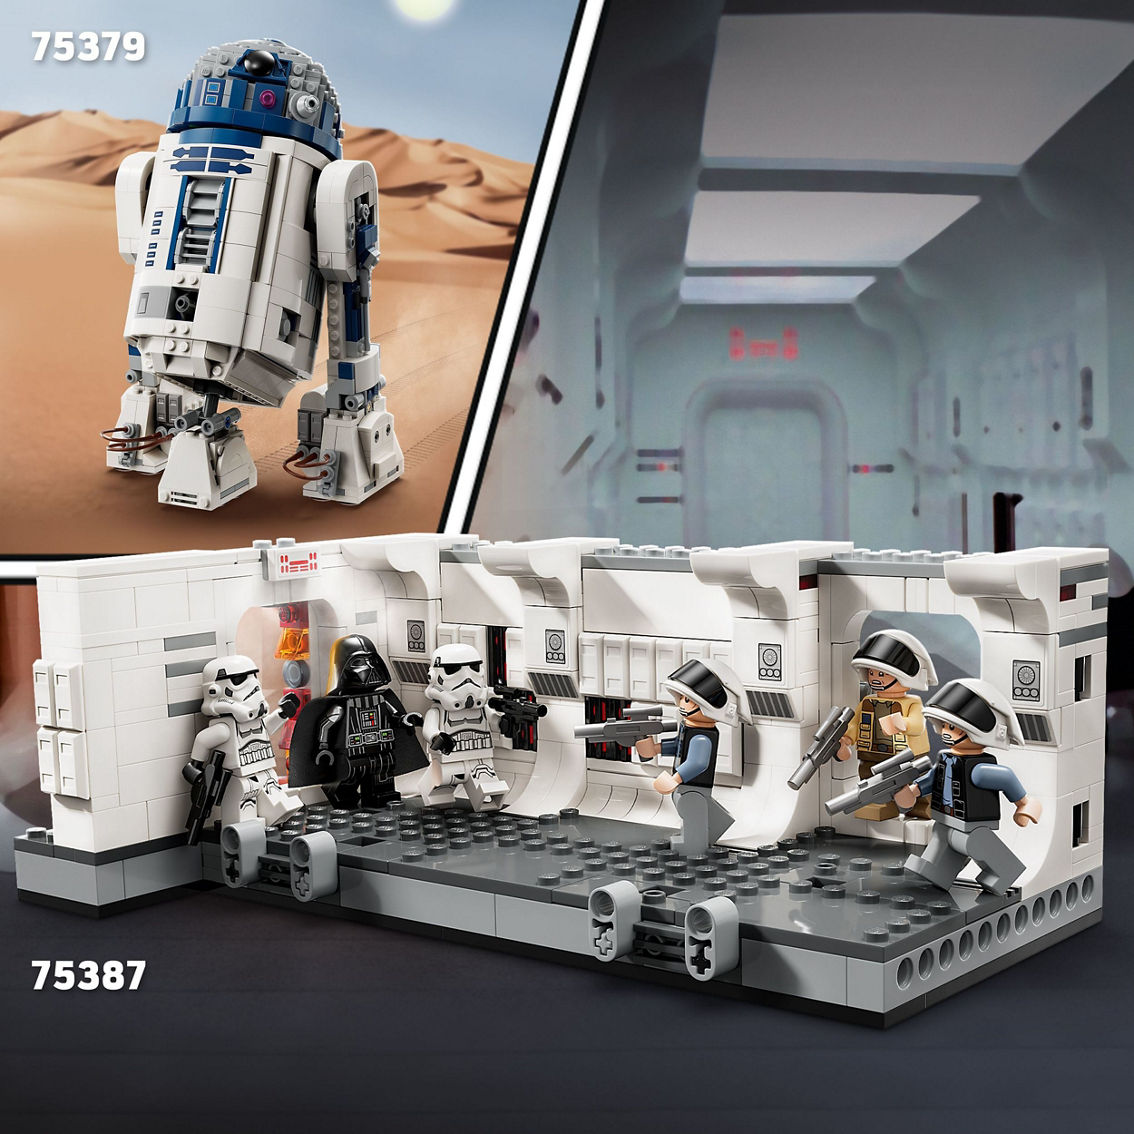 LEGO Star Wars Boarding the Tantive IV Playset 75387 - Image 5 of 10